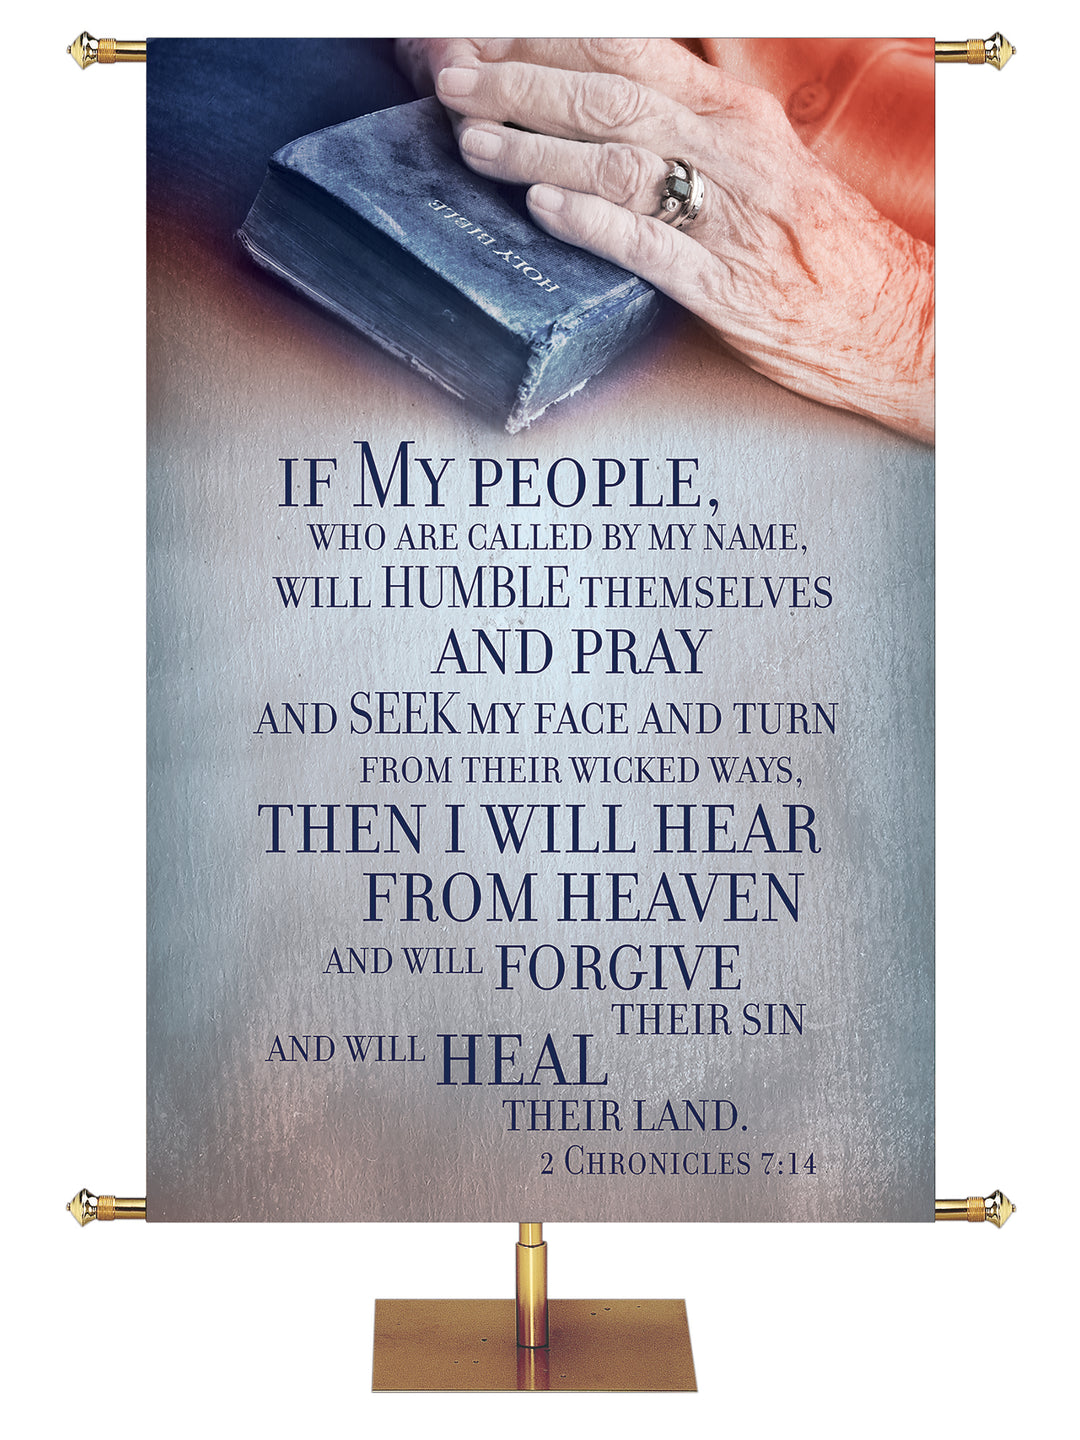 Red, White, and Blue Patriotic Fabric Banner and Scriptures - If My People